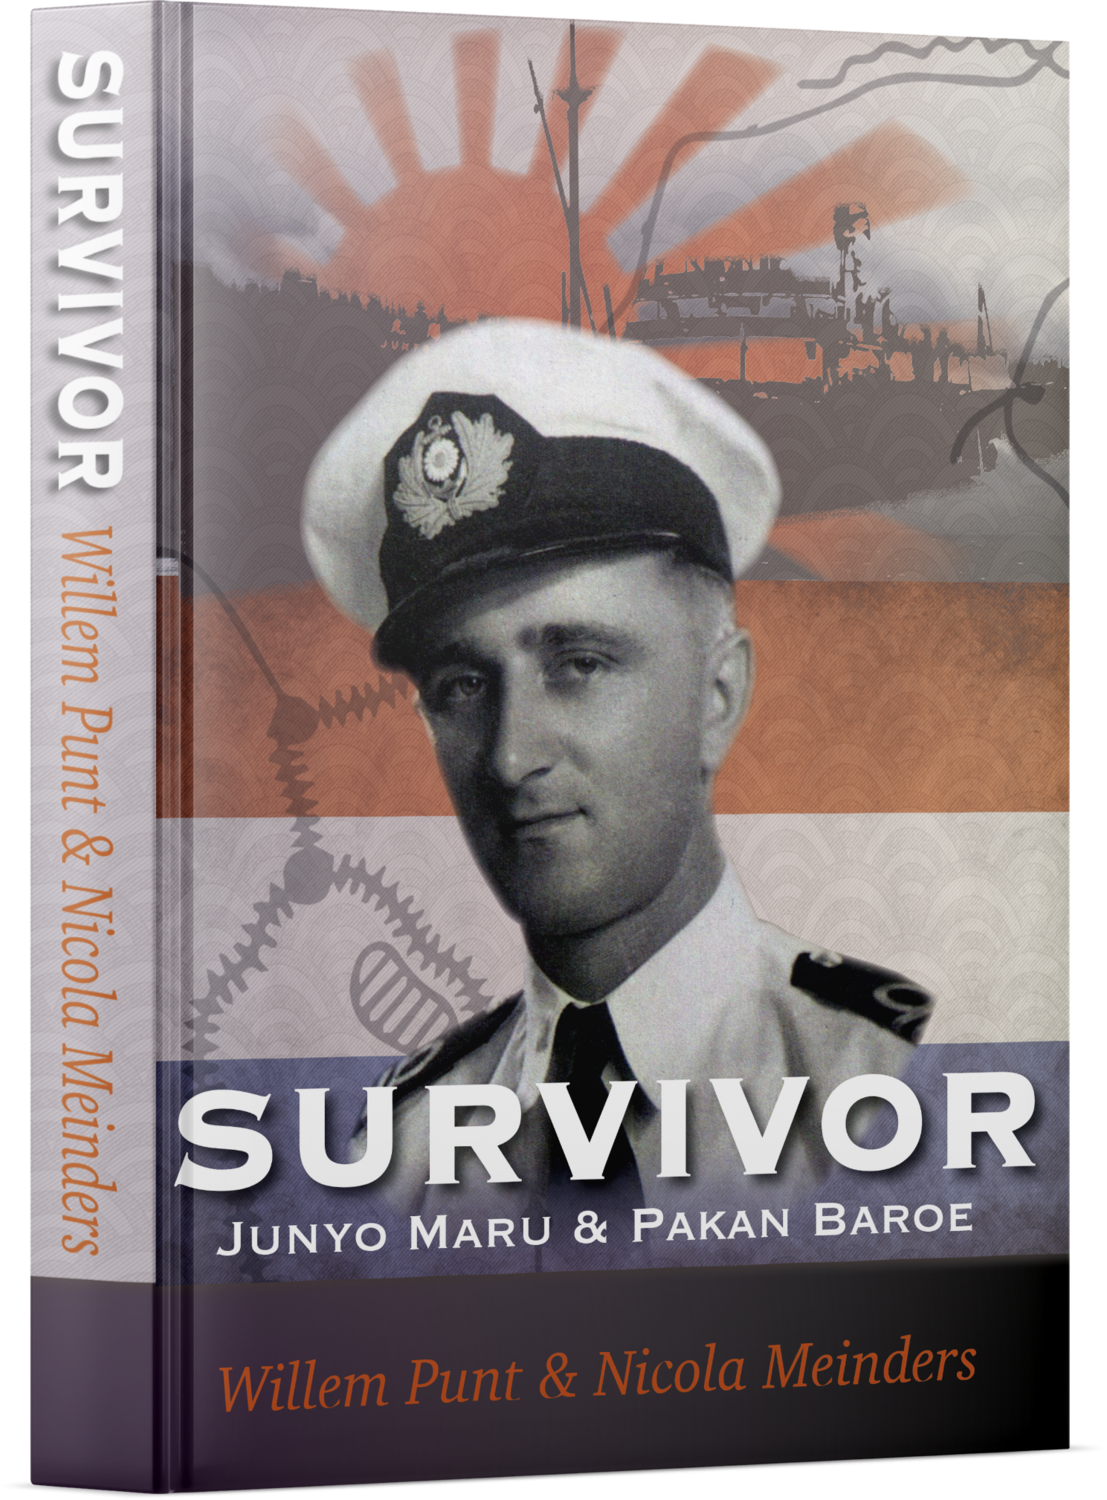 English Version - In Stock -
Survivor - The Story of Willem Punt